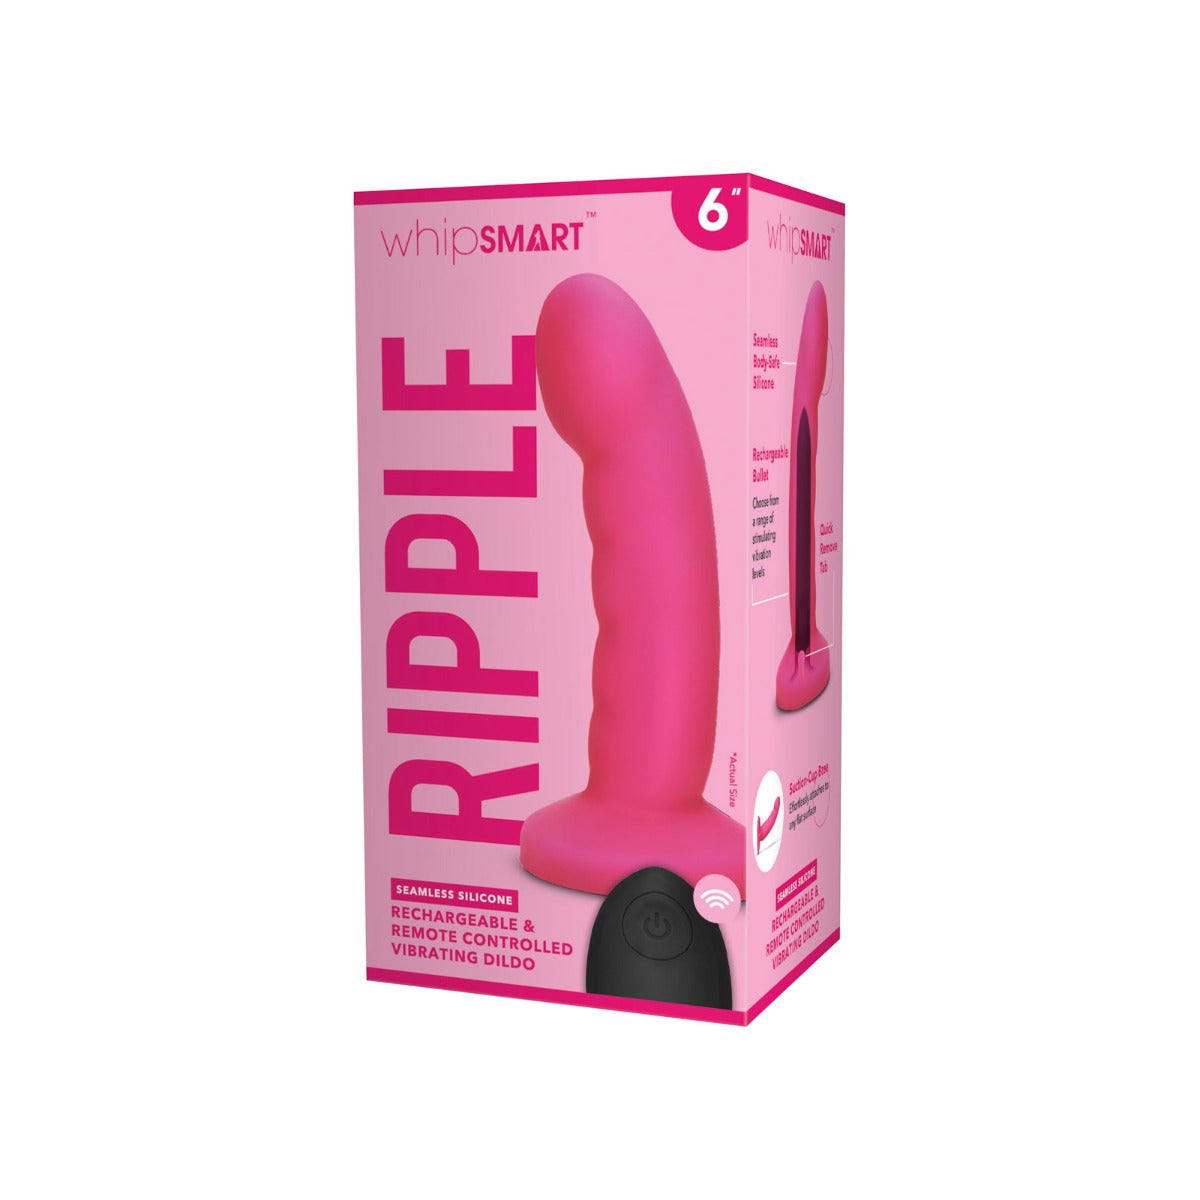 Suction Base Dildos Whipsmart 6 inch Curved Ripple Remote control Dildo - Hot Pink   